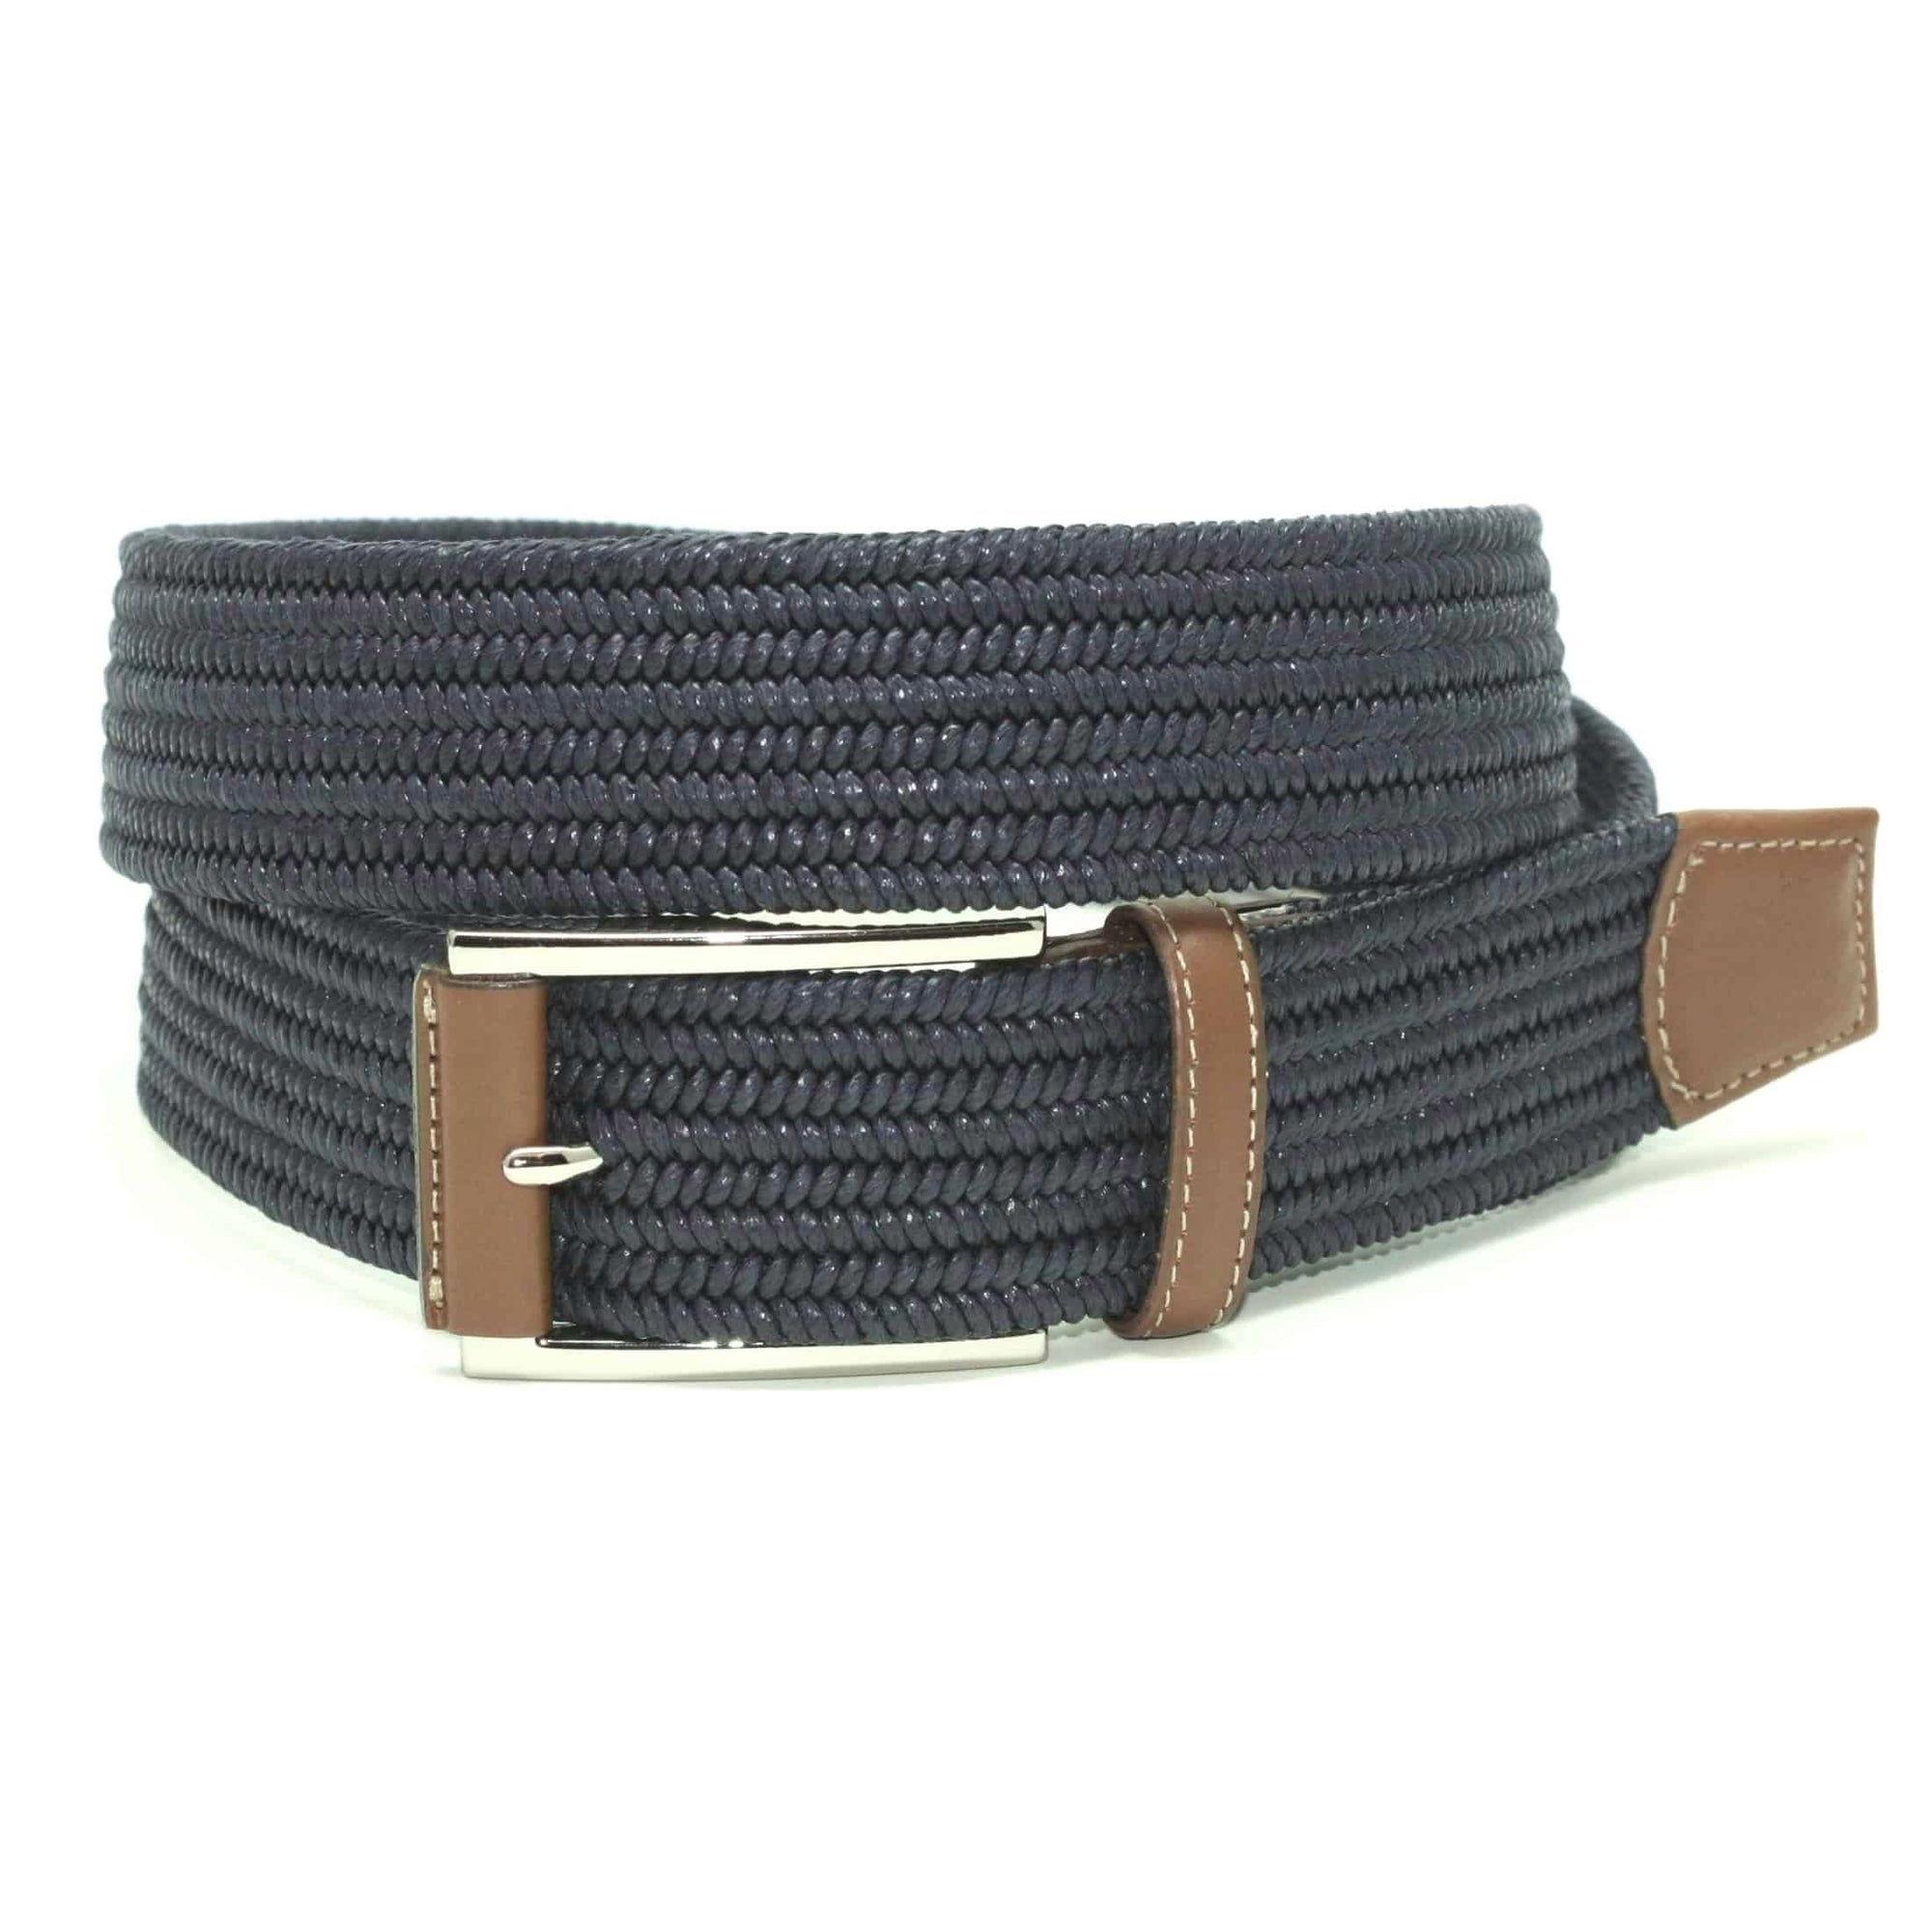 Italian Mini Woven Cotton Stretch Belt in Navy by Torino Leather